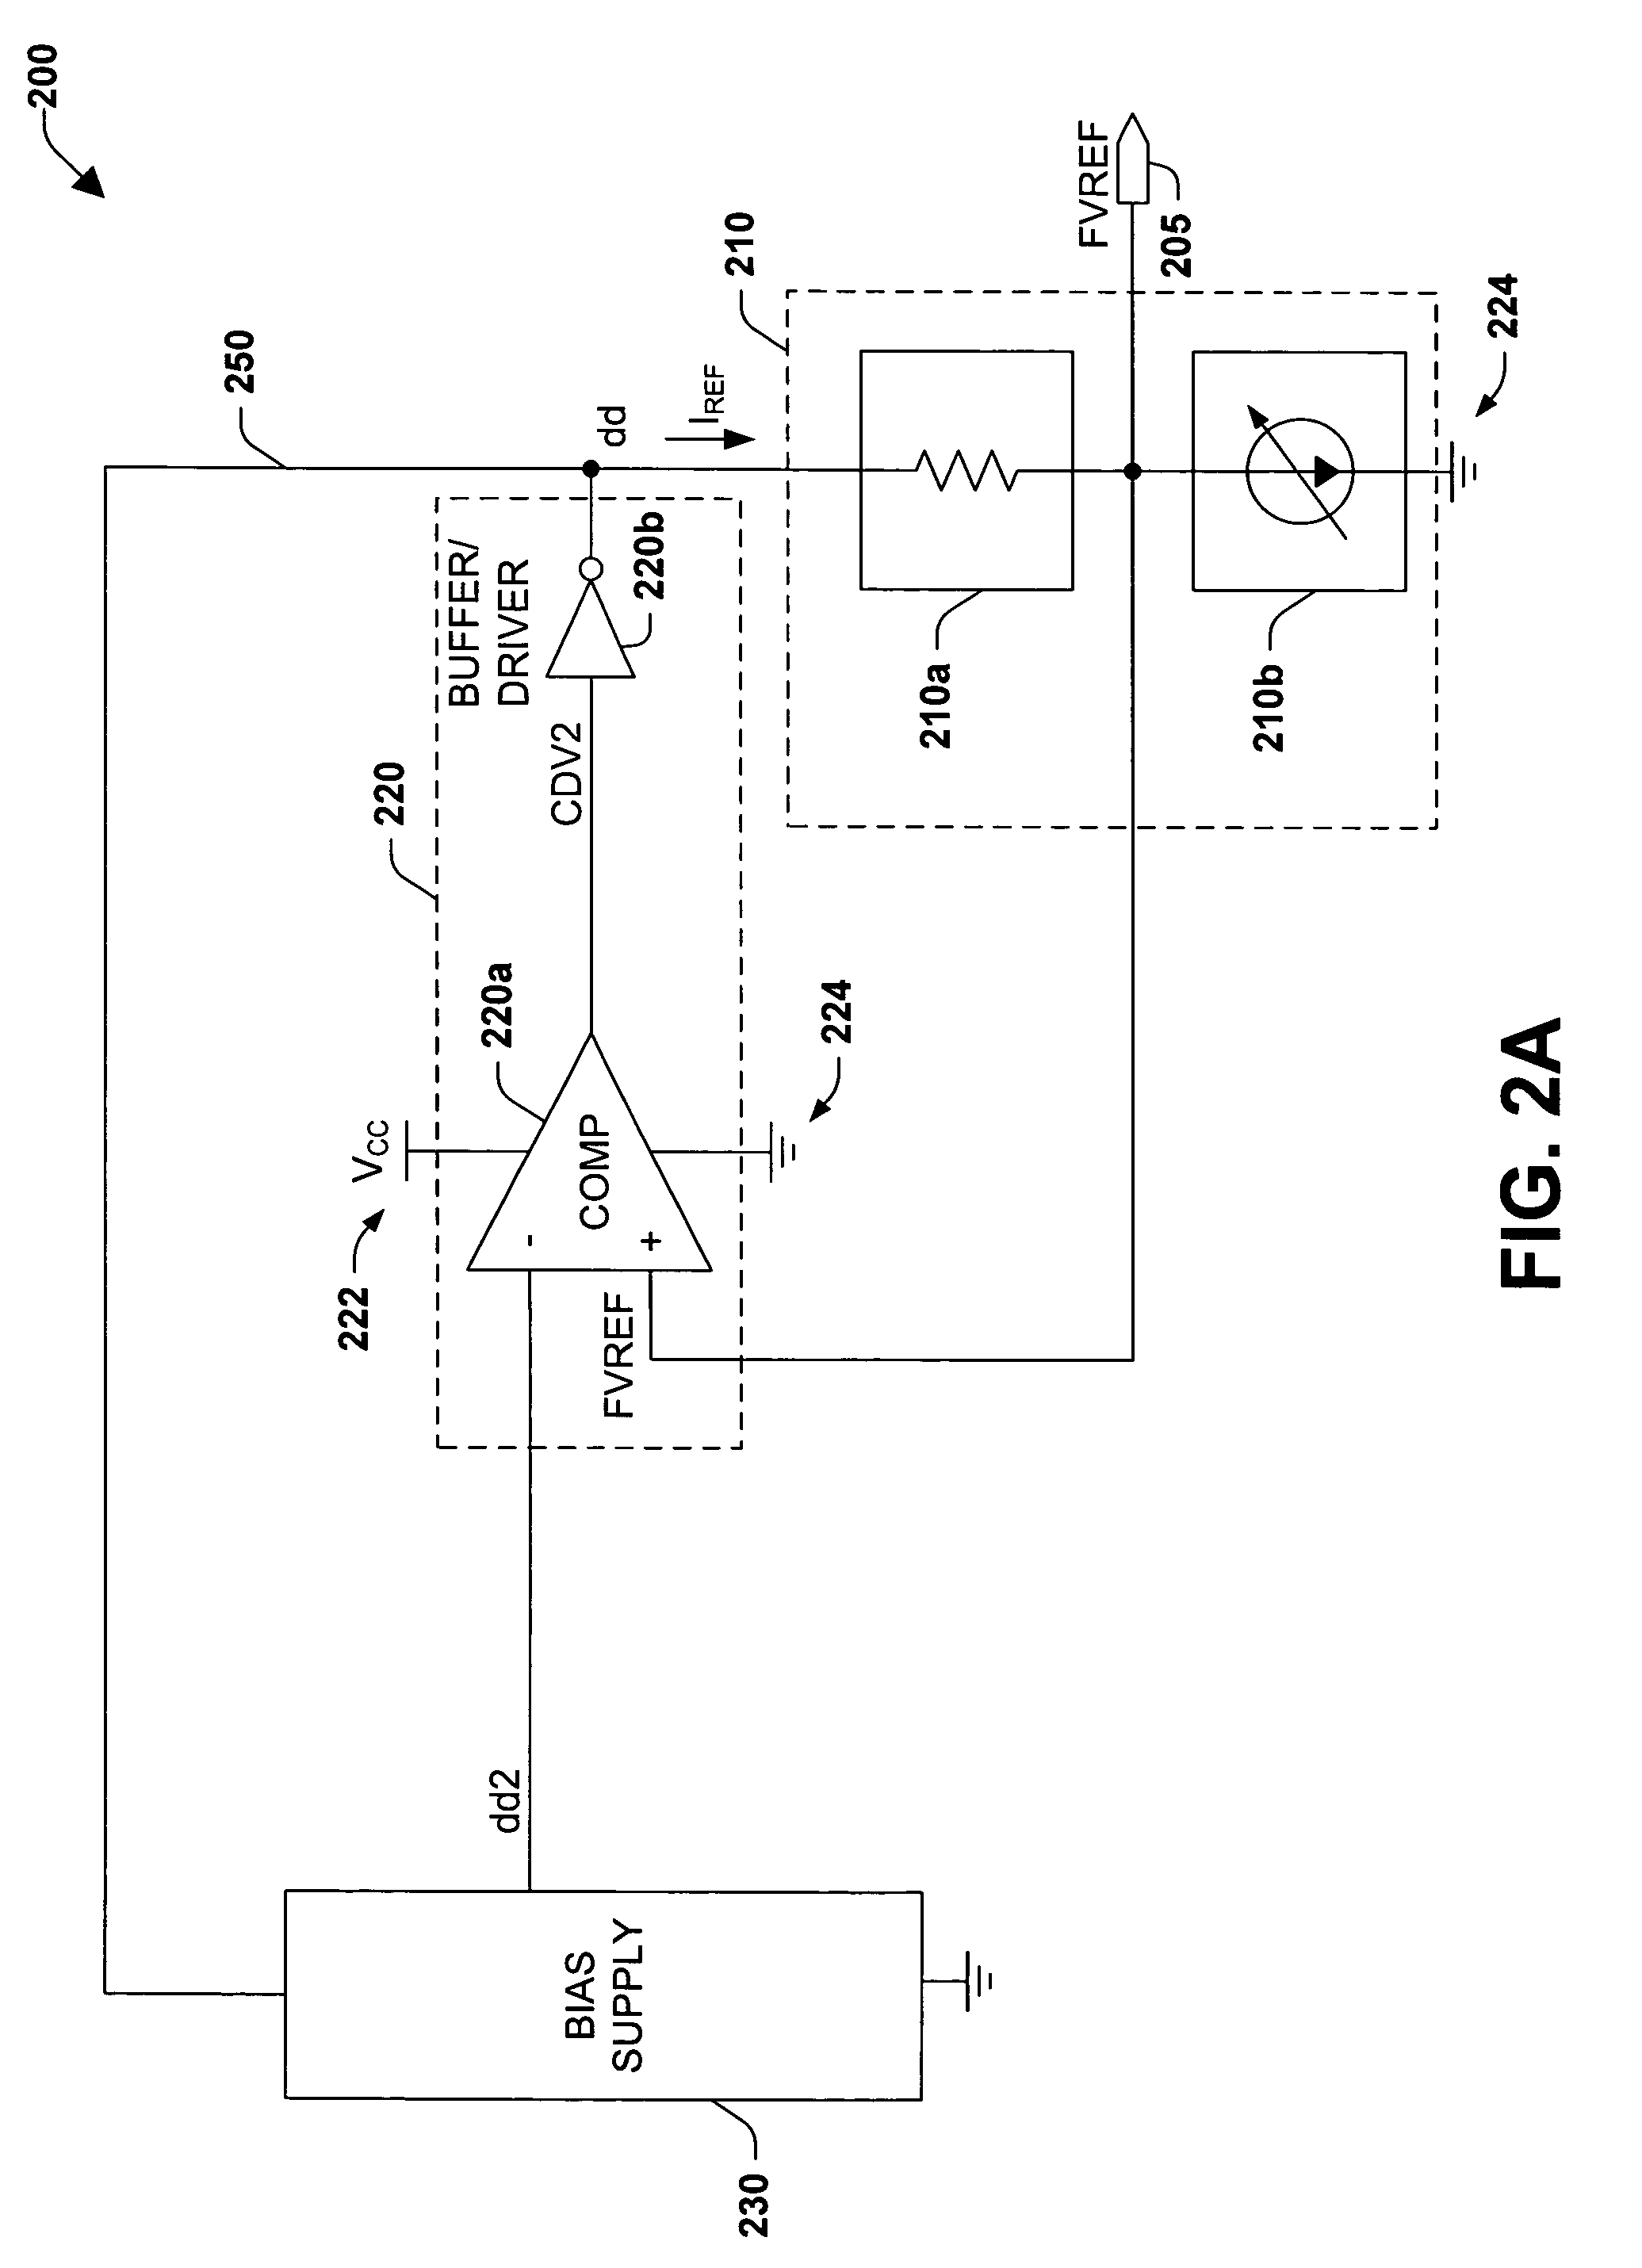 Method to provide a higher reference voltage at a lower power supply in flash memory devices